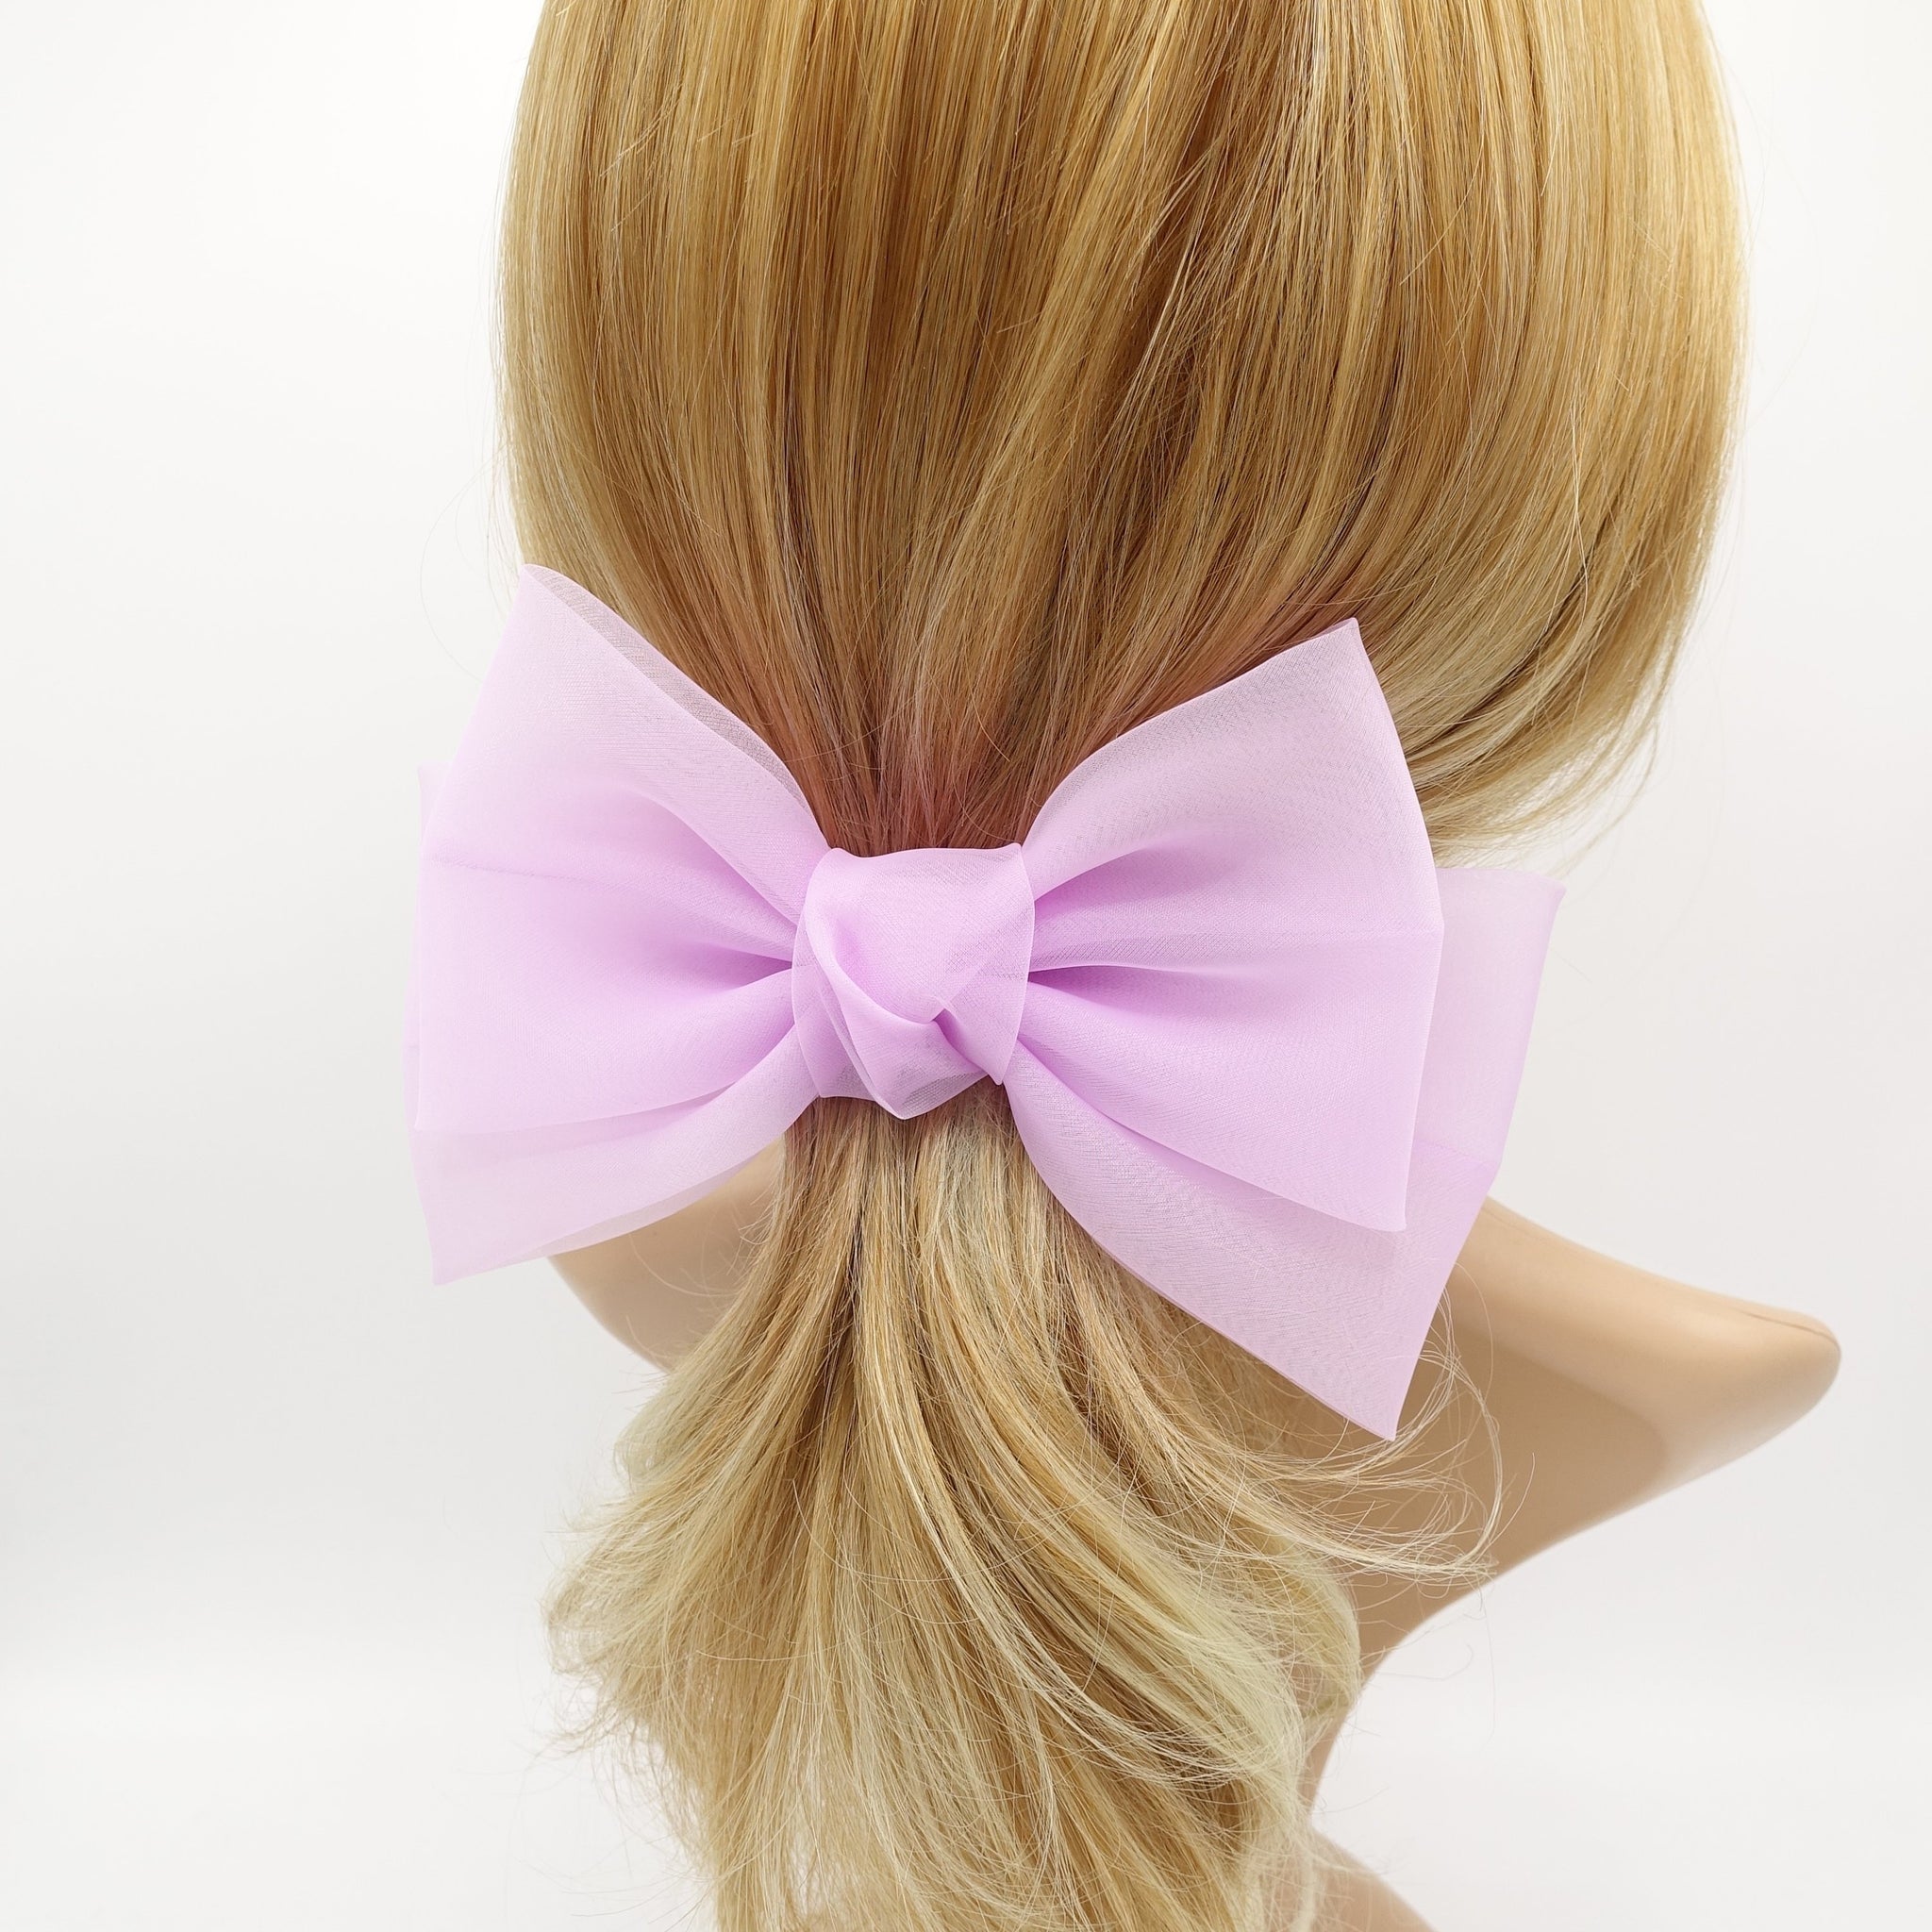 VeryShine claw/banana/barrette Lavender pink organza hair bow normal size hair accessory for women